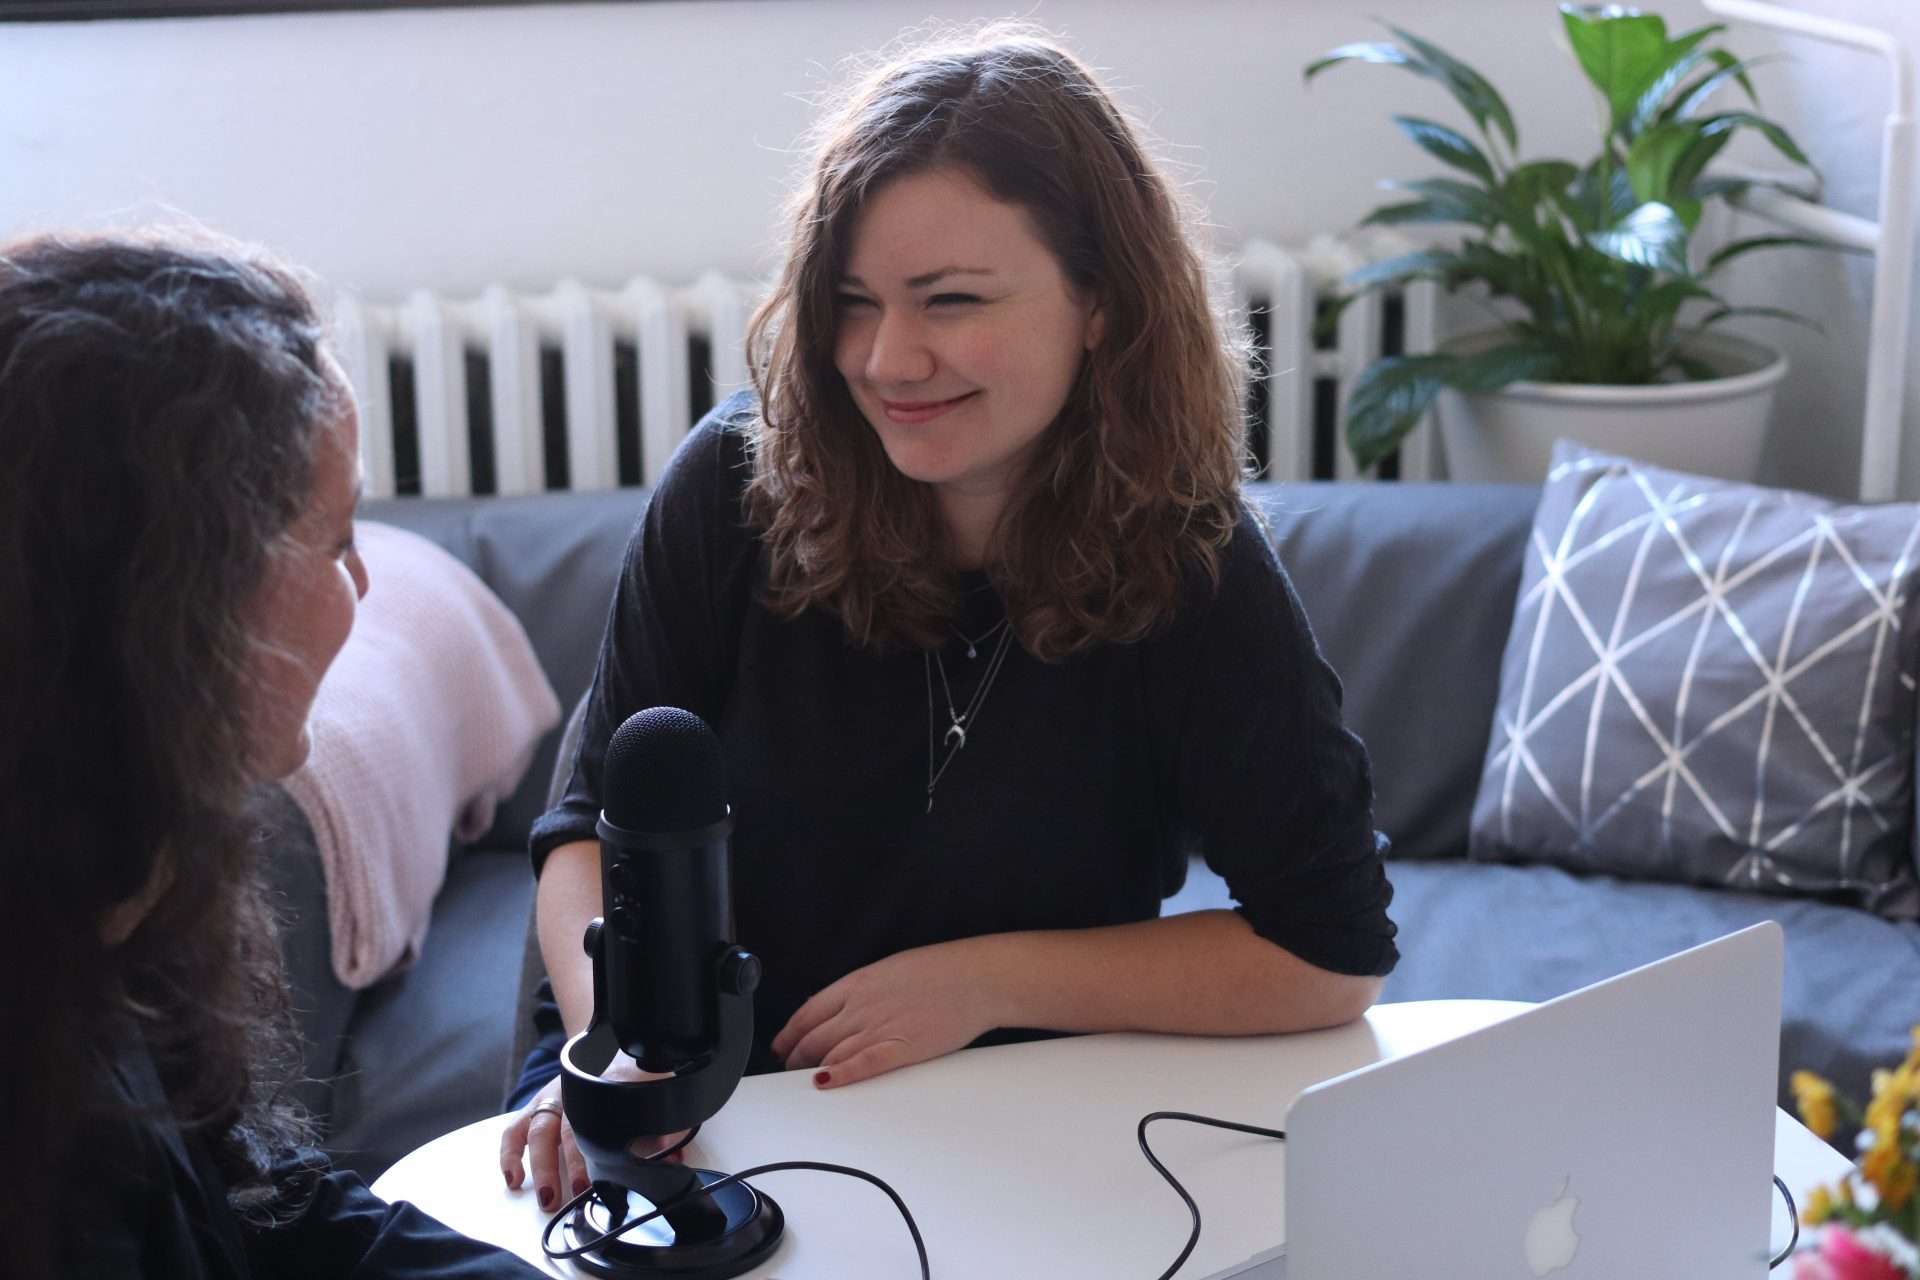 Female podcasters. Image from unsplash